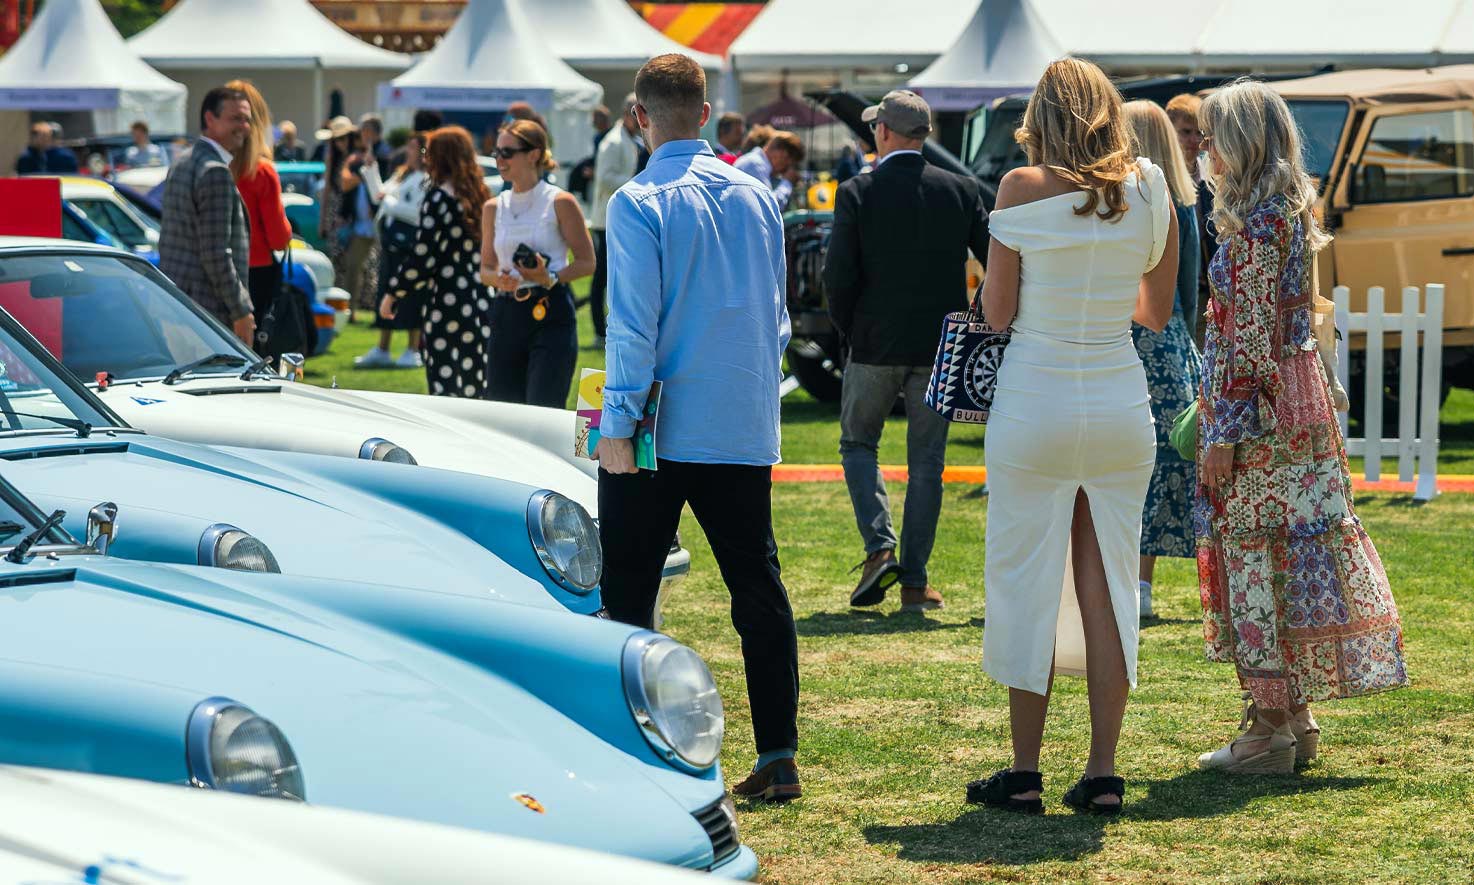 Porsche Display at London Concours